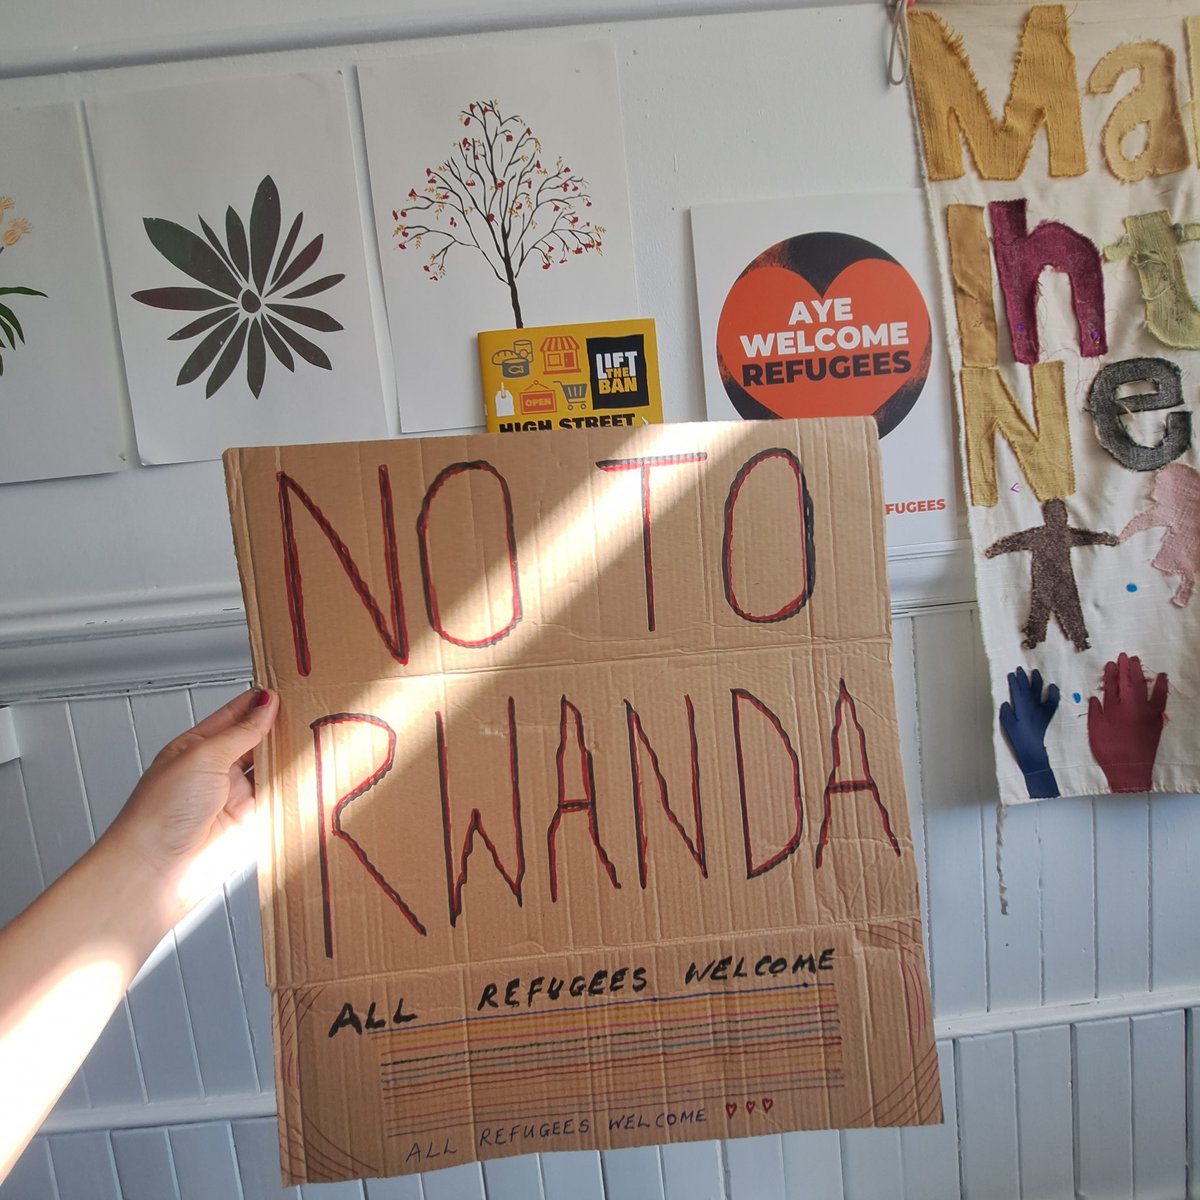 We are getting ready for the peaceful gathering against the inhumane #RwandaBill, alongside many others. Join us if you can⬇️ 🔹George Square, Glasgow 🔹Today, 5.30pm #RefugeesWelcome #RwandaNotInMyName